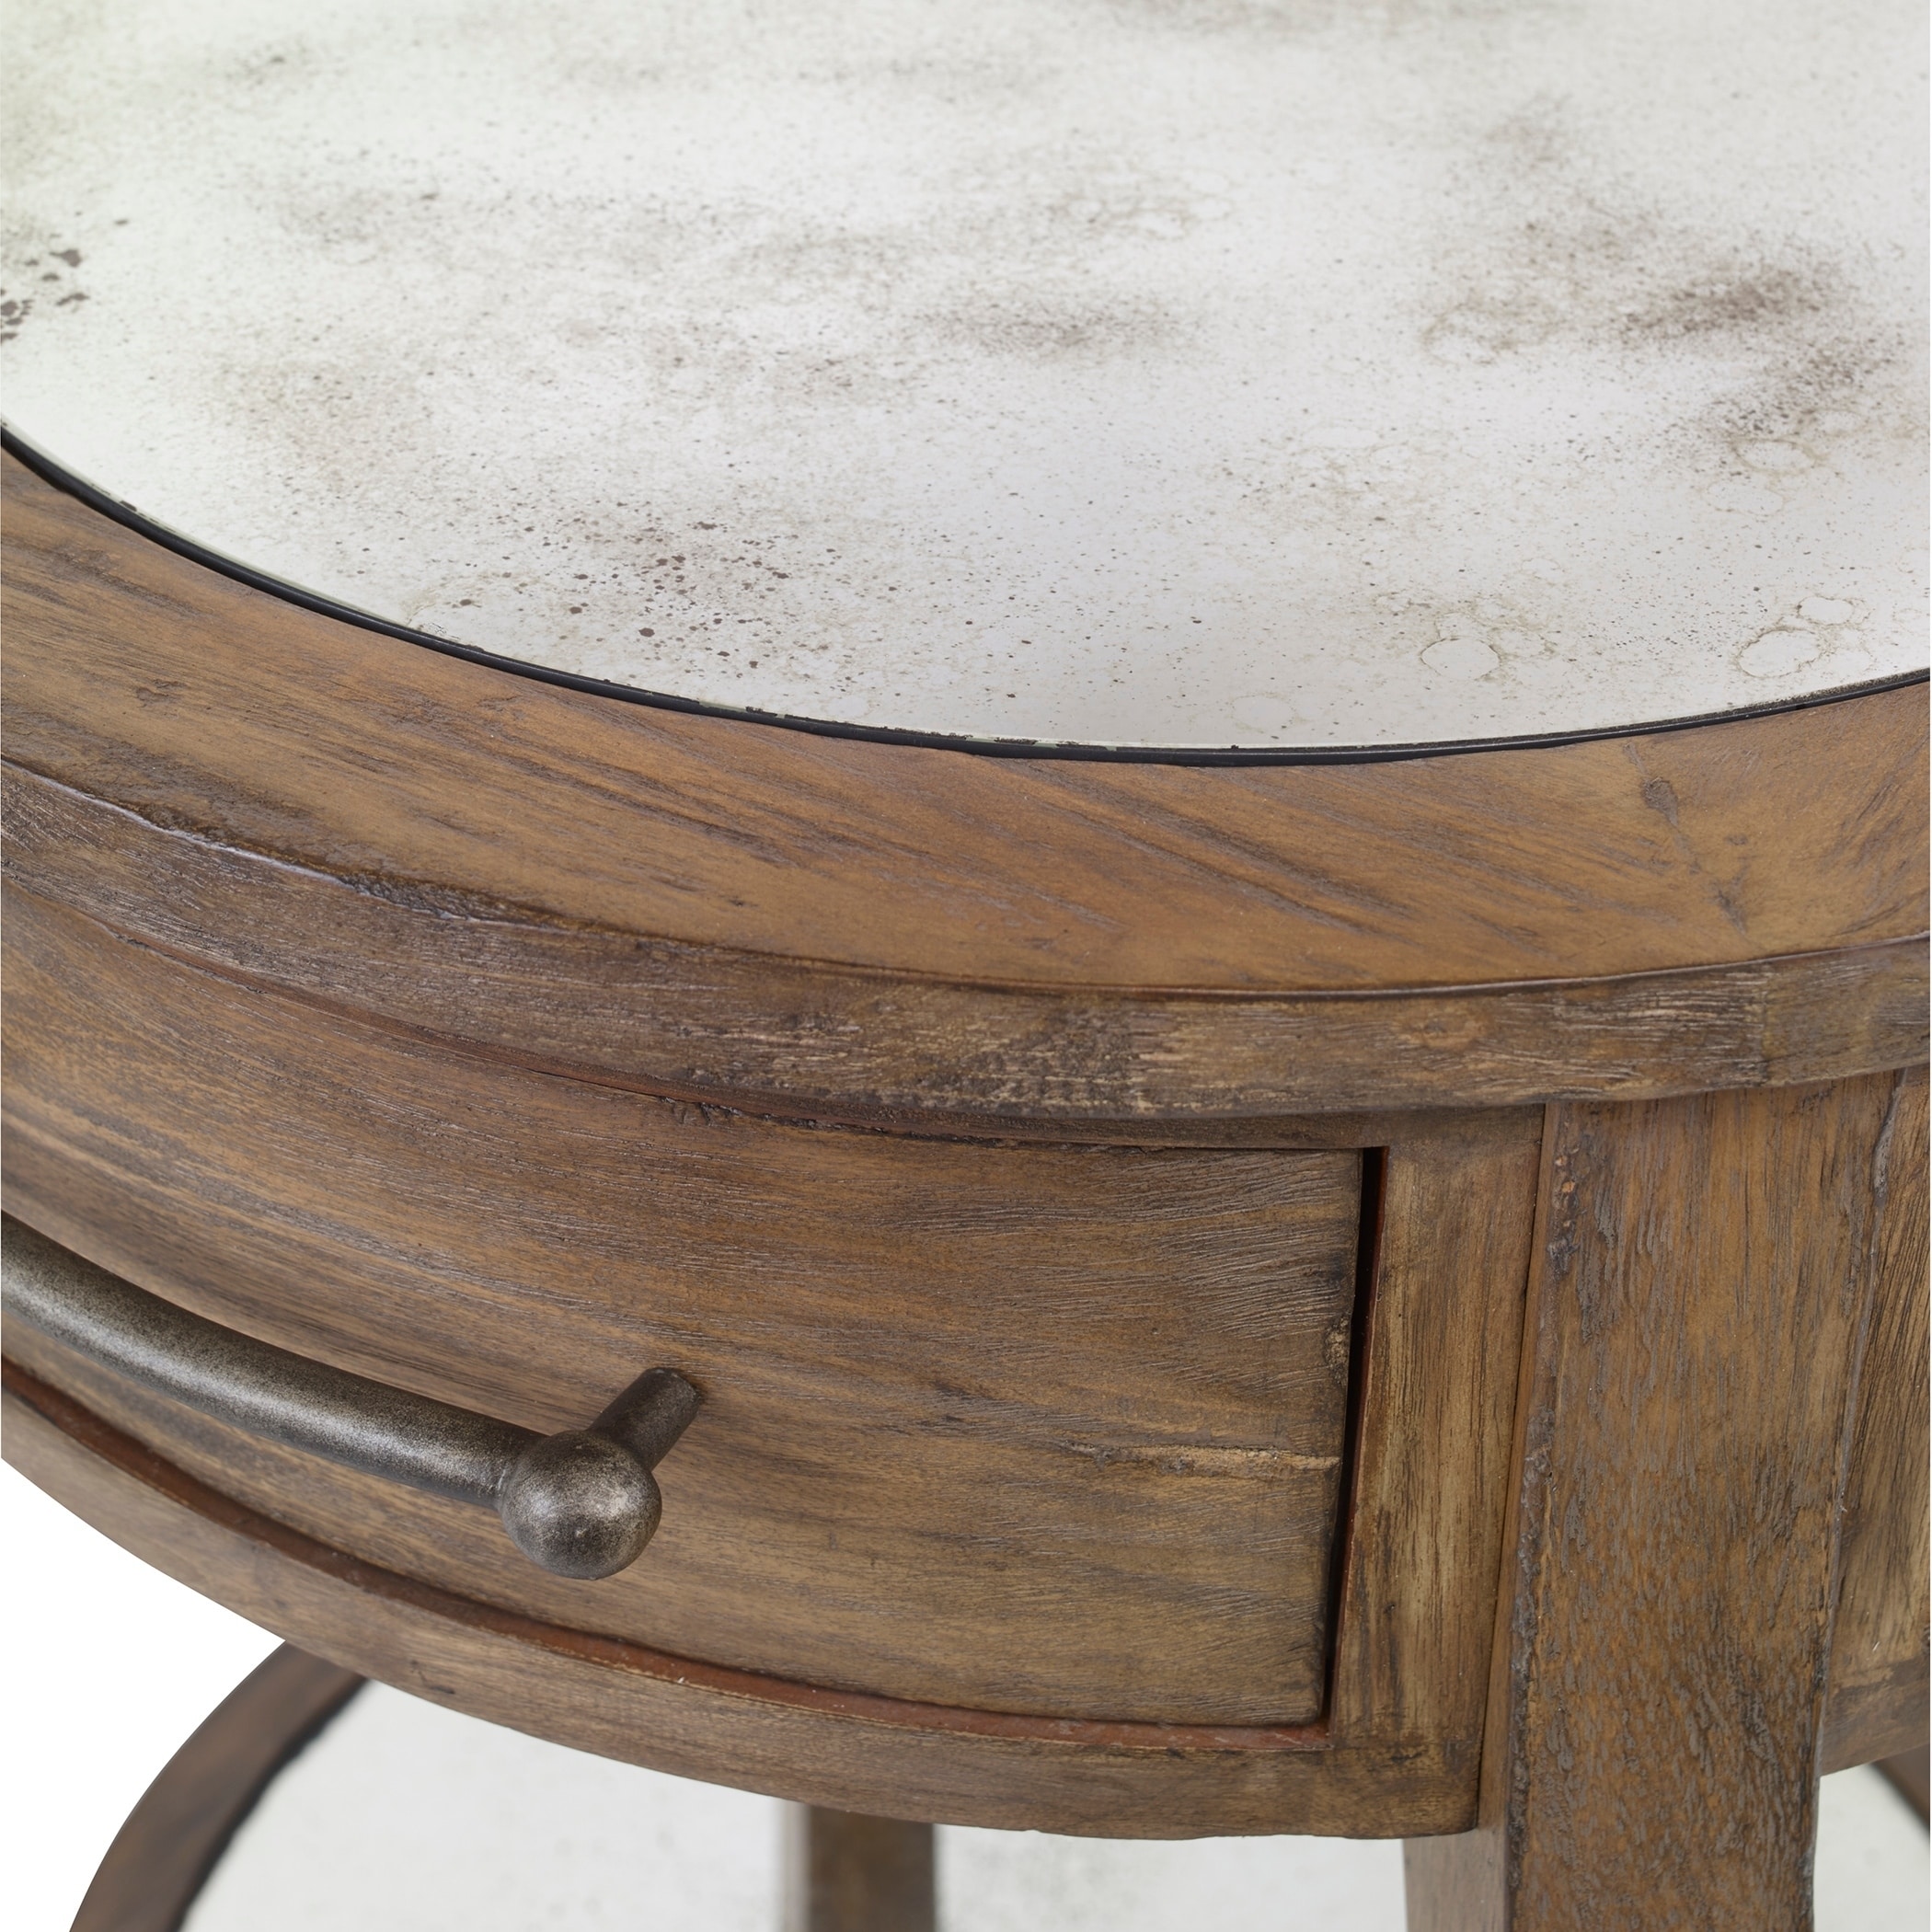 Shop Uttermost Raelynn Weathered Pecan Wood Lamp Table Overstock